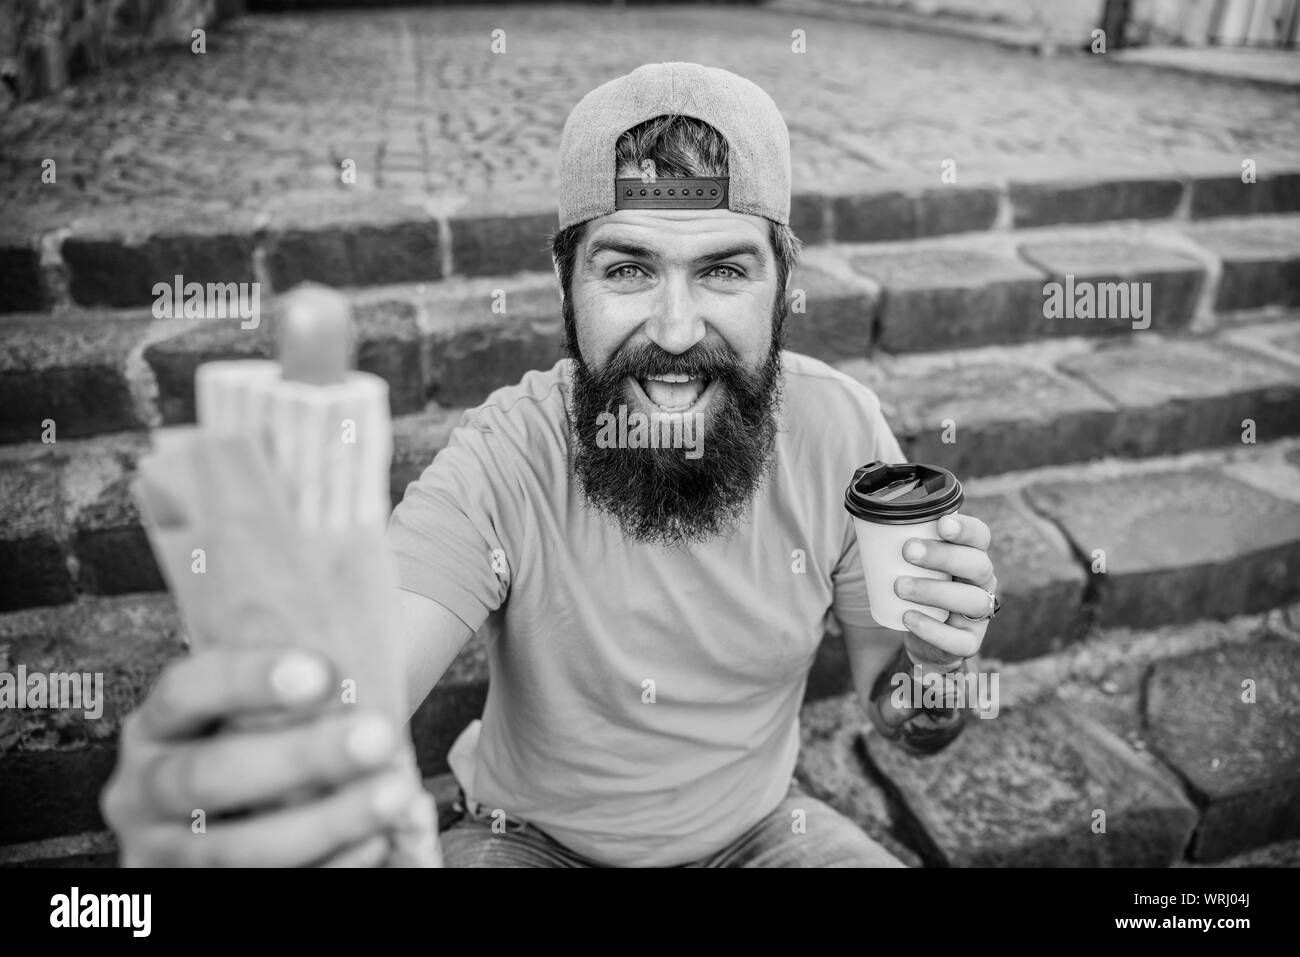 Snack for good mood. Guy eating hot dog. Man bearded eat tasty sausage and drink paper cup. Street food concept. Urban lifestyle nutrition. Junk food. Carefree hipster eat junk food while sit stairs. Stock Photo